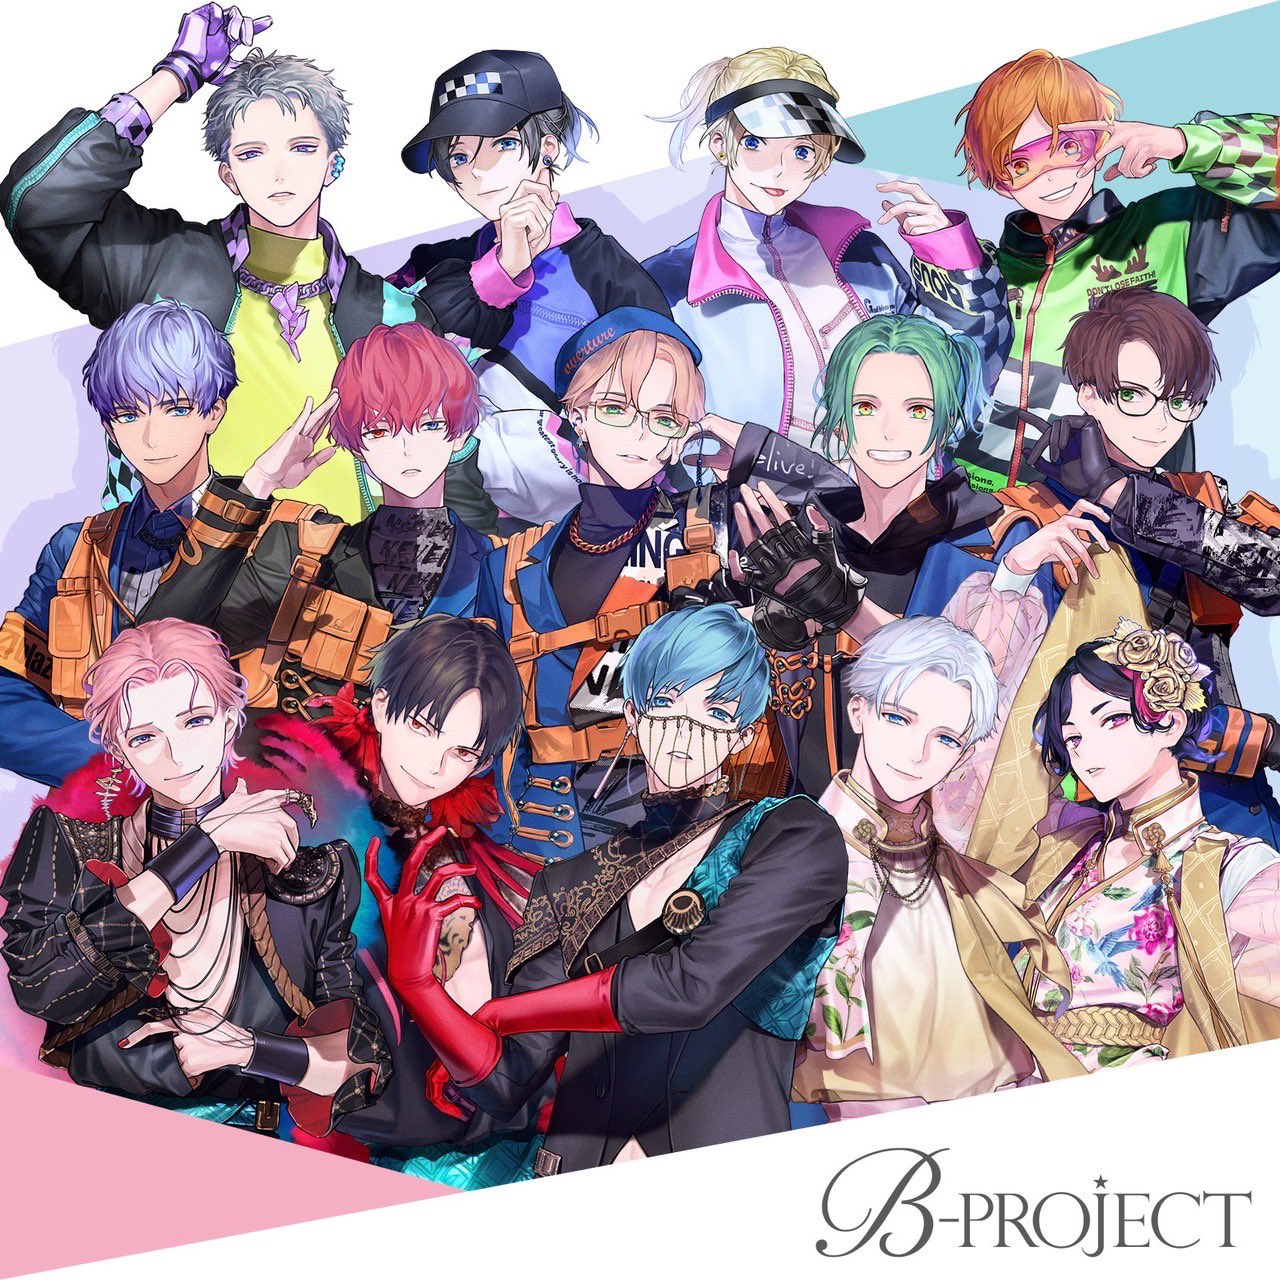 B-PROJECT official on Twitter: 